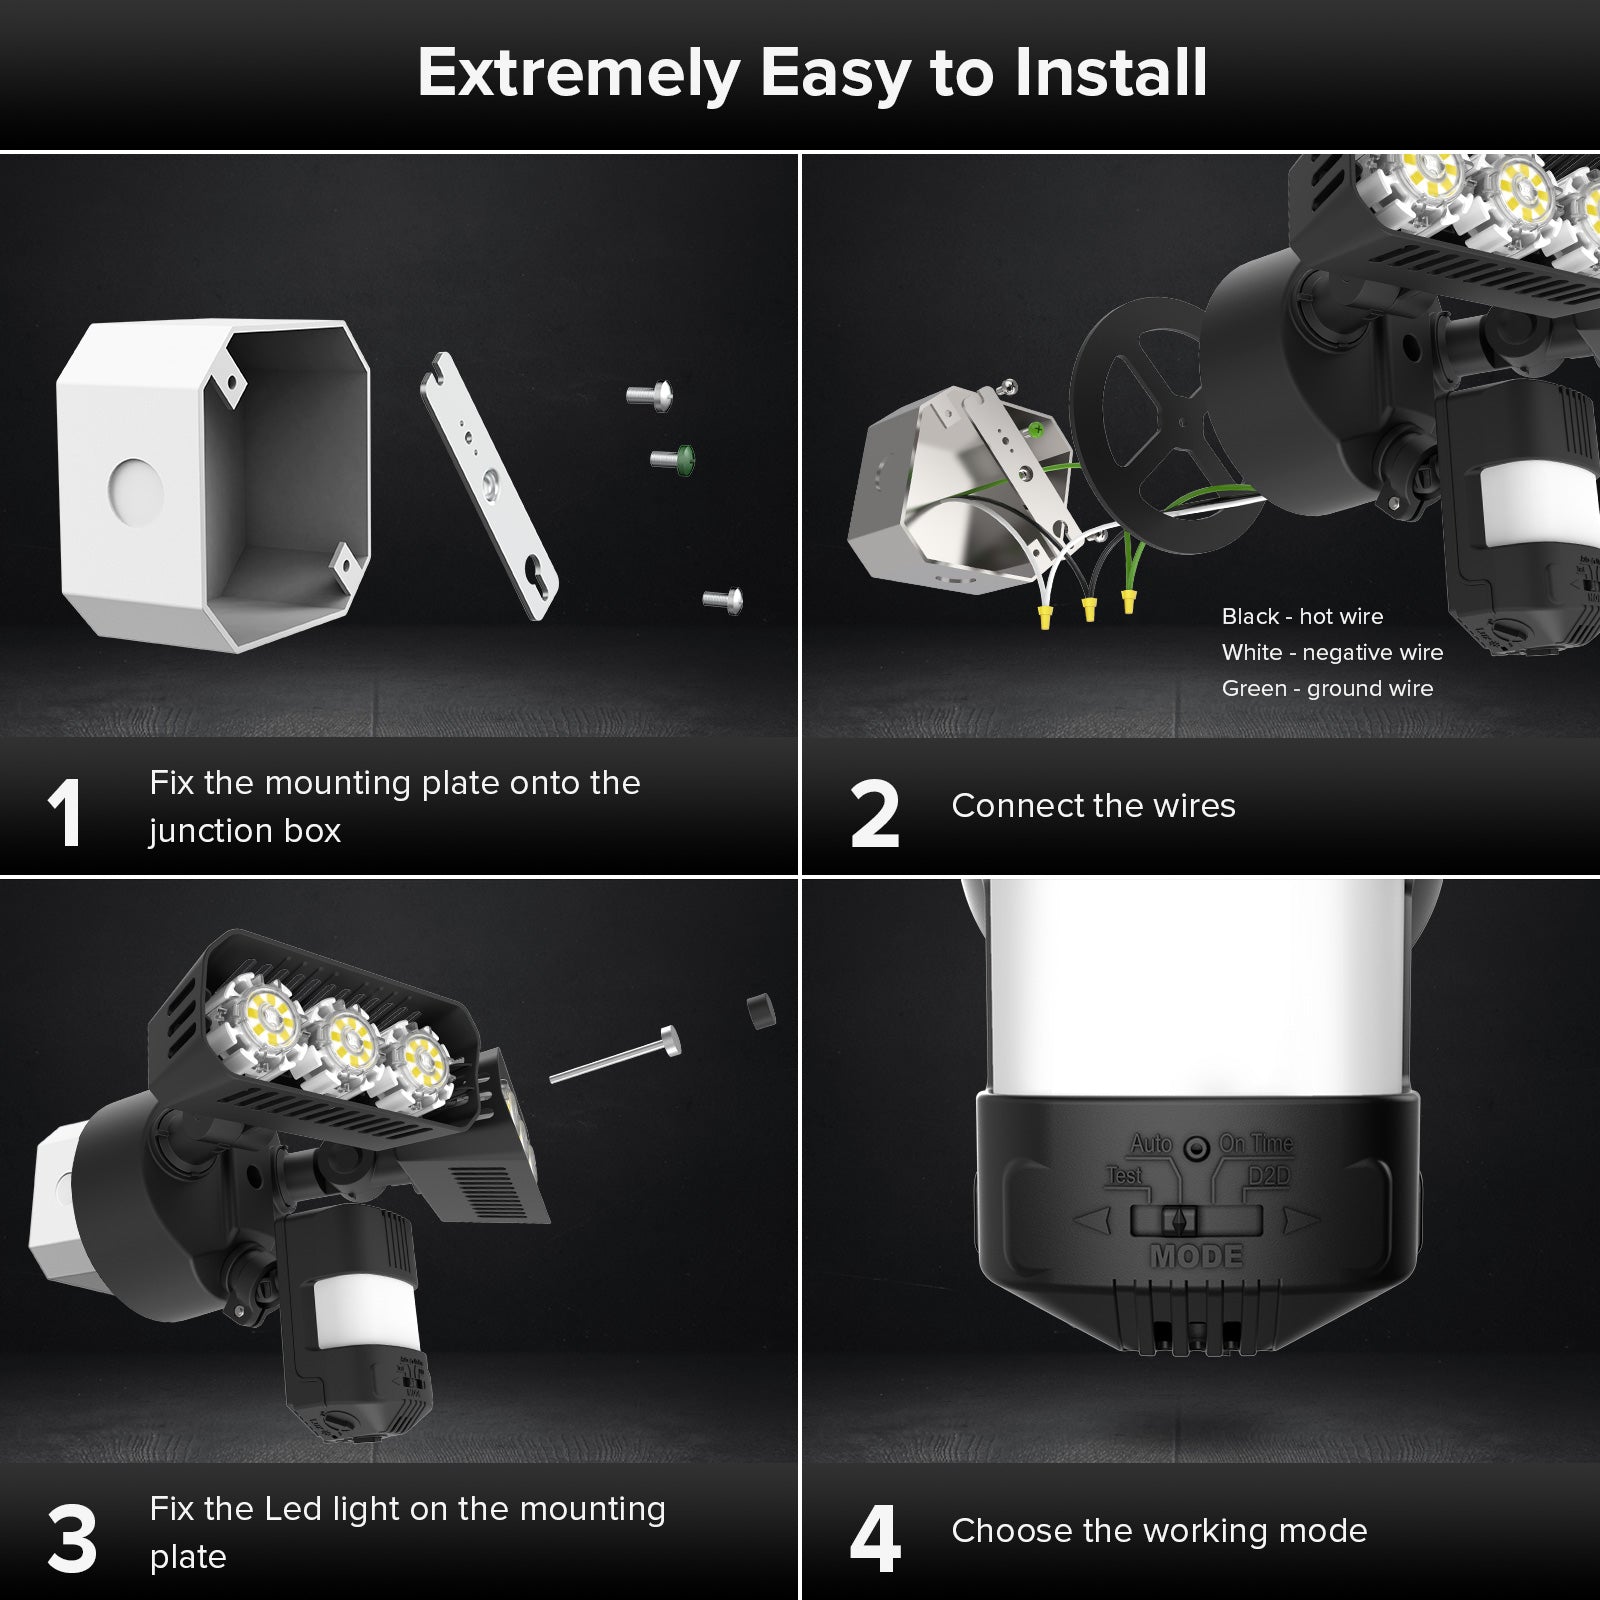 27W LED Security Light (Dusk to Dawn & Motion Sensor) is extremely easy to install